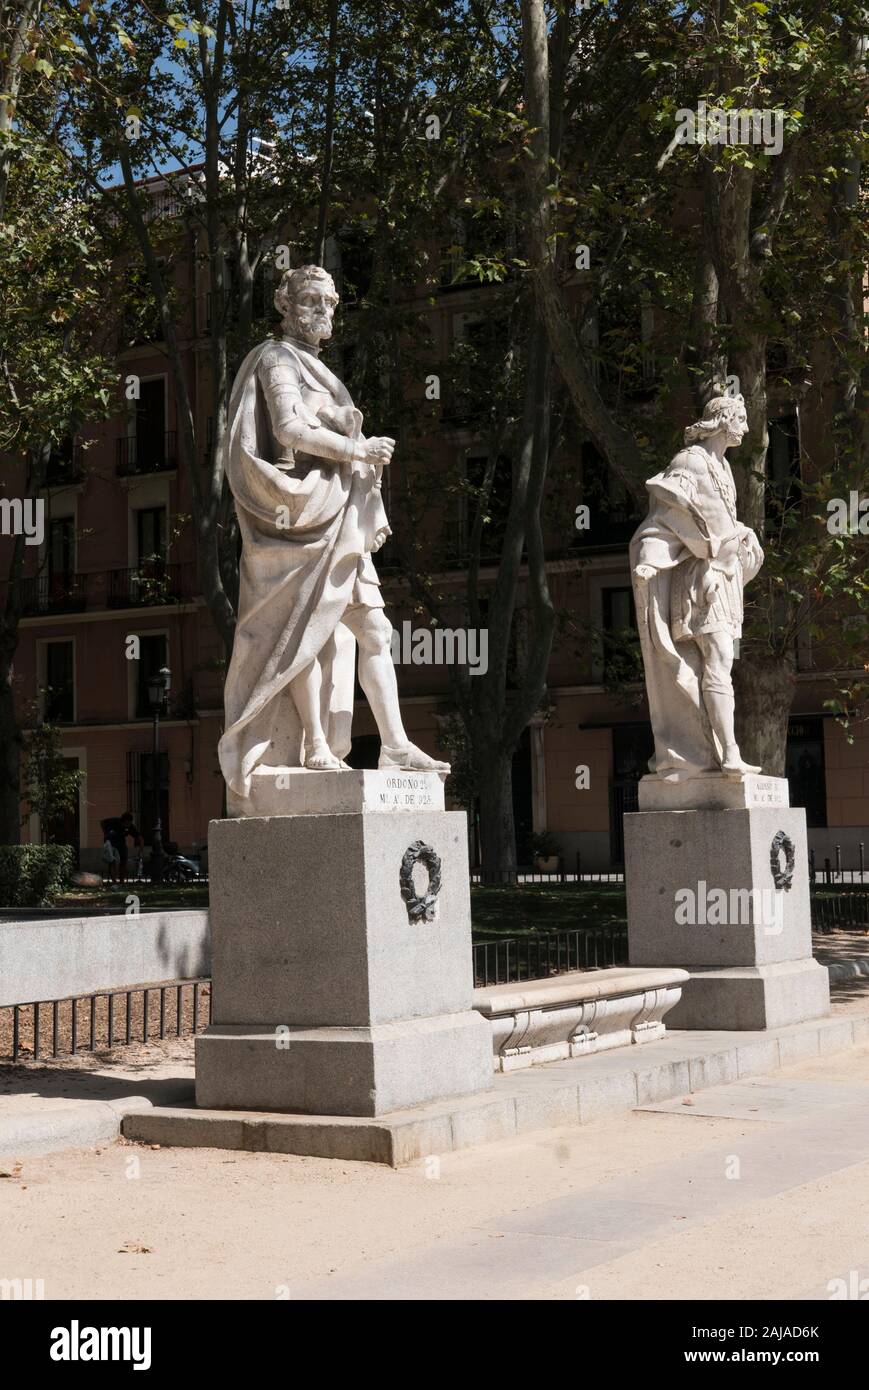 Statues of historical figures, Madrid, Spain Stock Photo